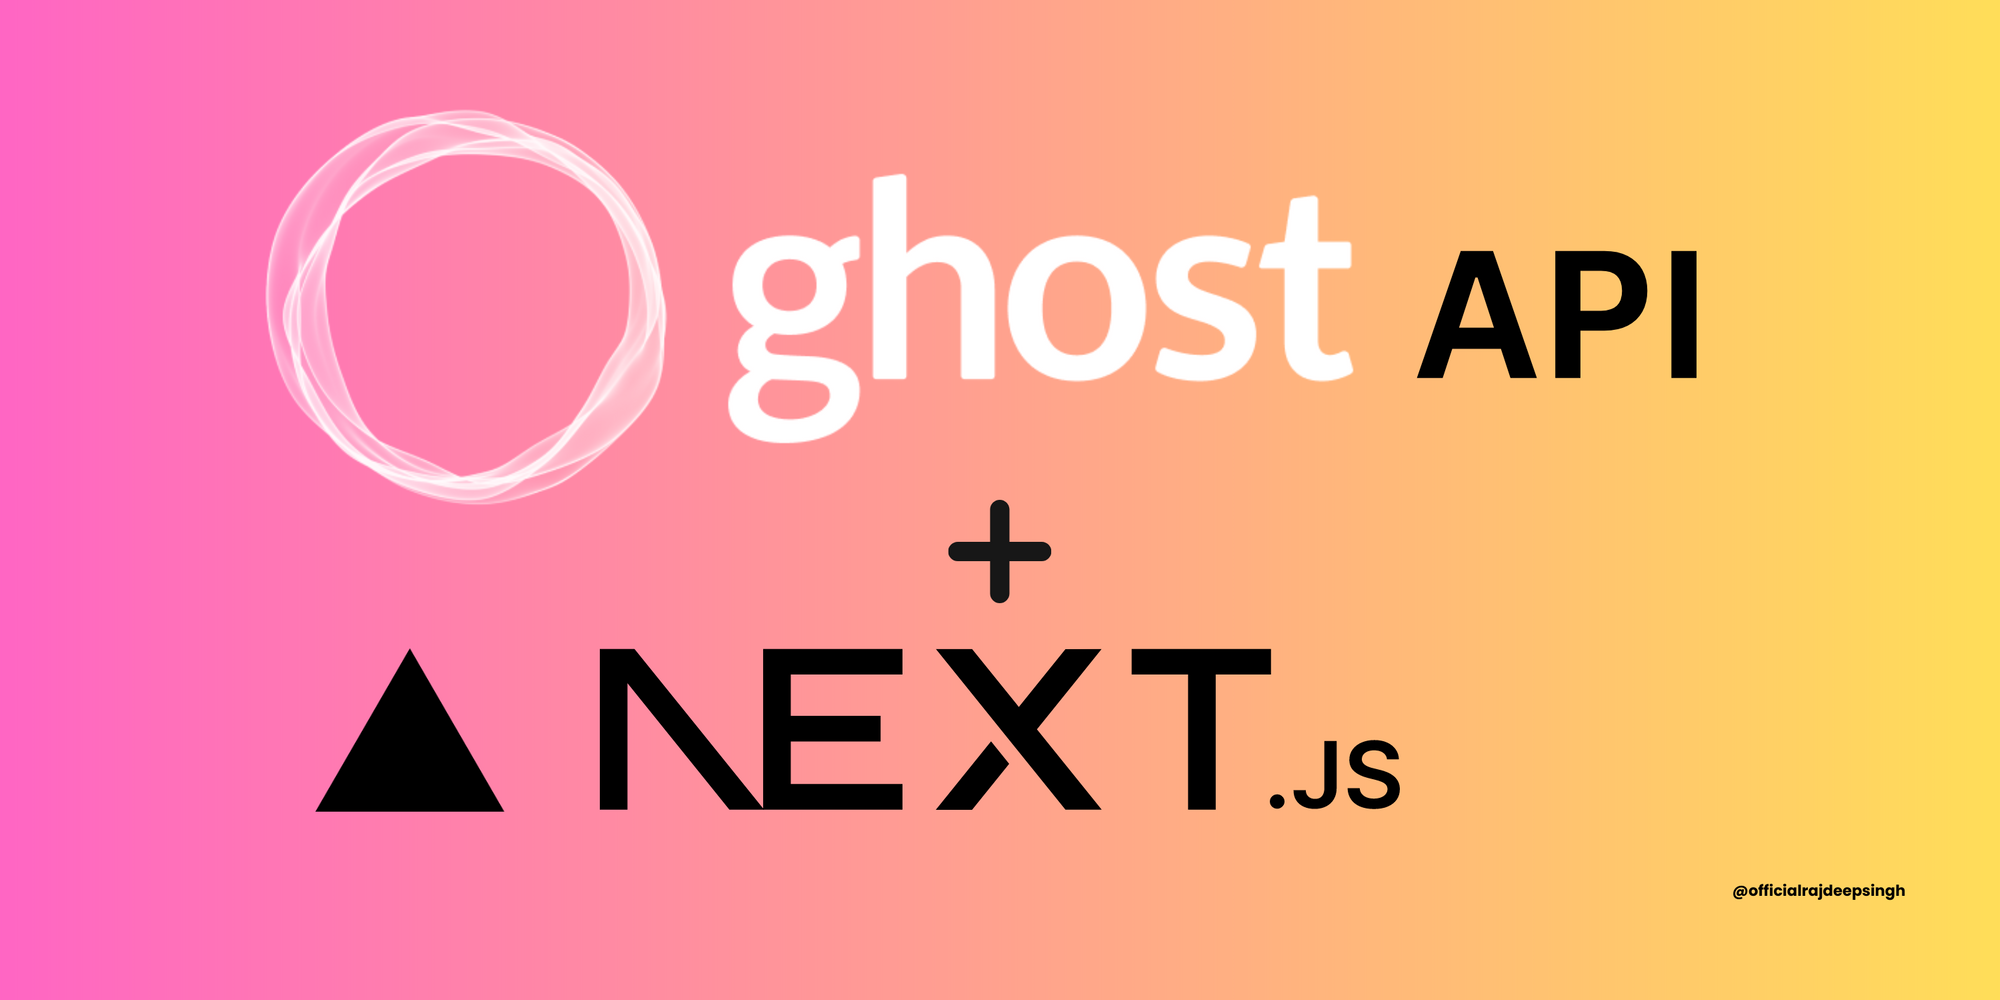 How to Build a Blog with the Ghost API and Next.js